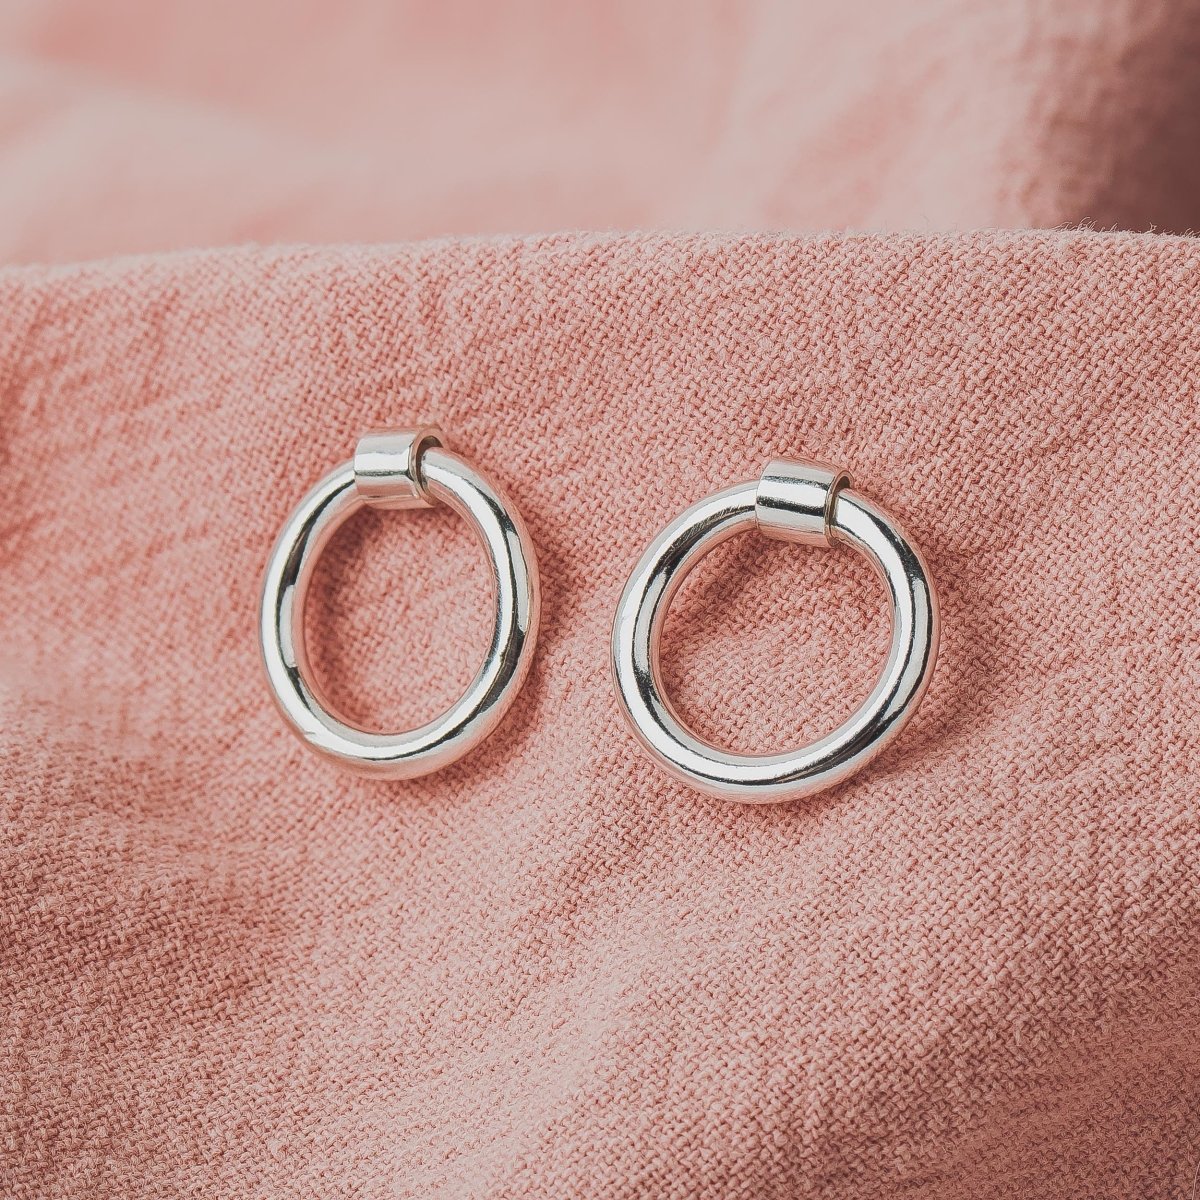 Forever Connected Earrings - Melanie Golden Jewelry - _badge_new, earrings, everyday essentials, forever connected, hoop earrings, new, stud, stud earrings